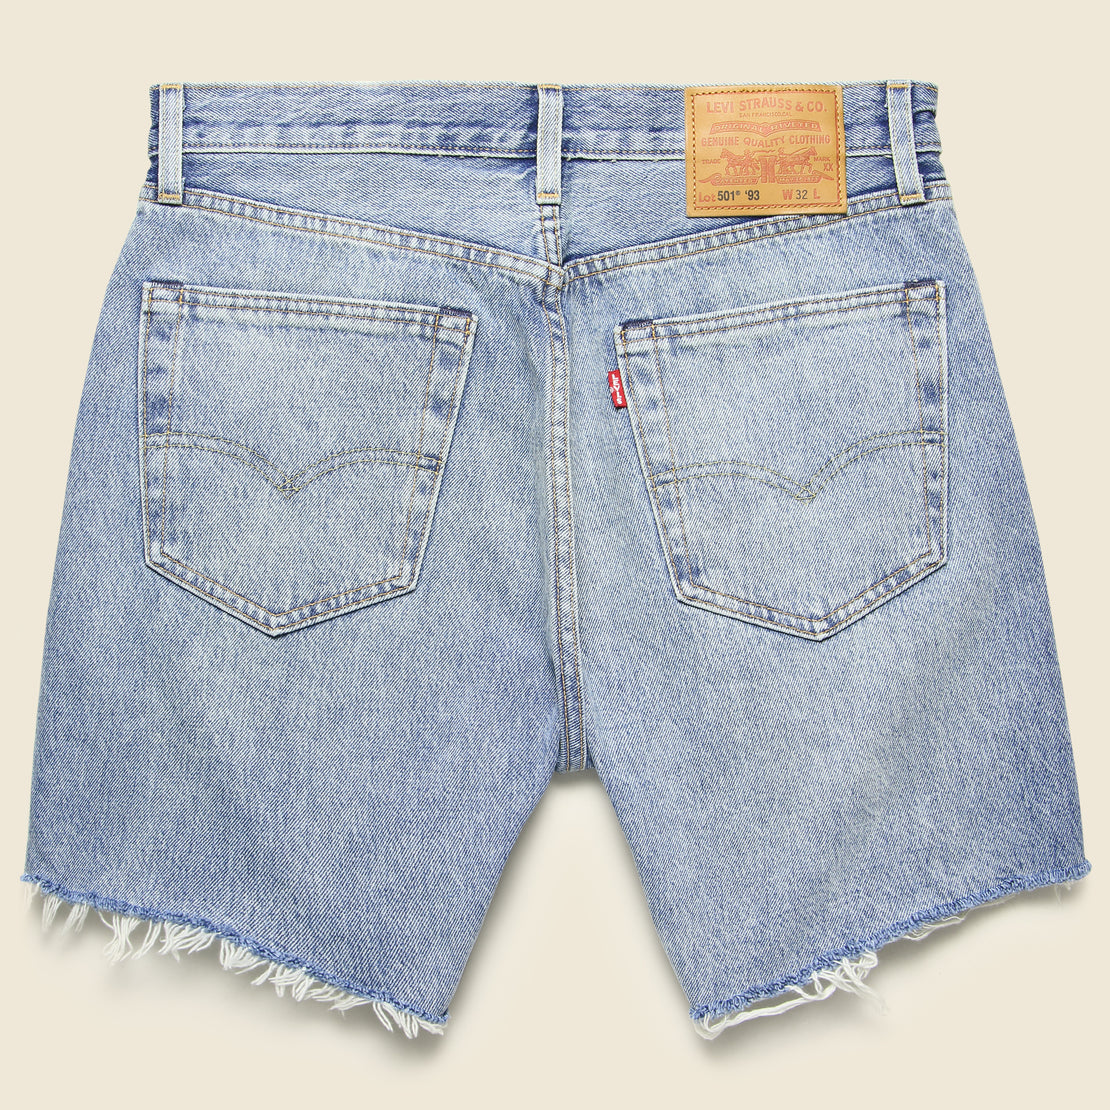 501 '93 Shorts - Dancing Groove - Levis Premium - STAG Provisions - Shorts - Solid